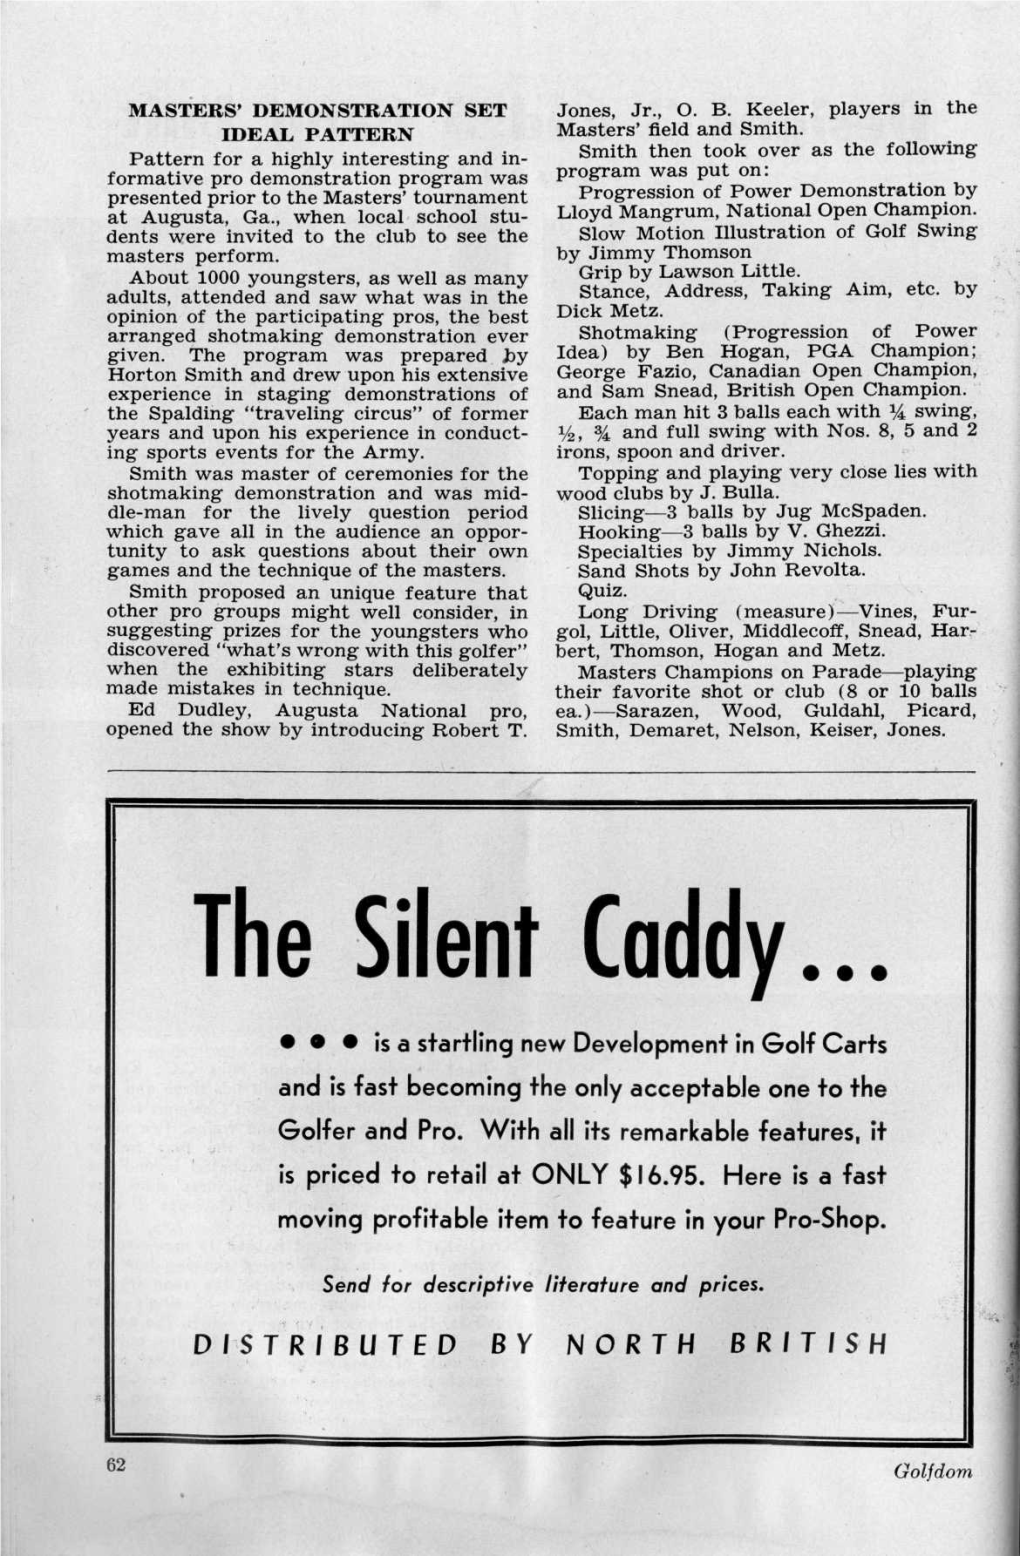 The Silent Caddy